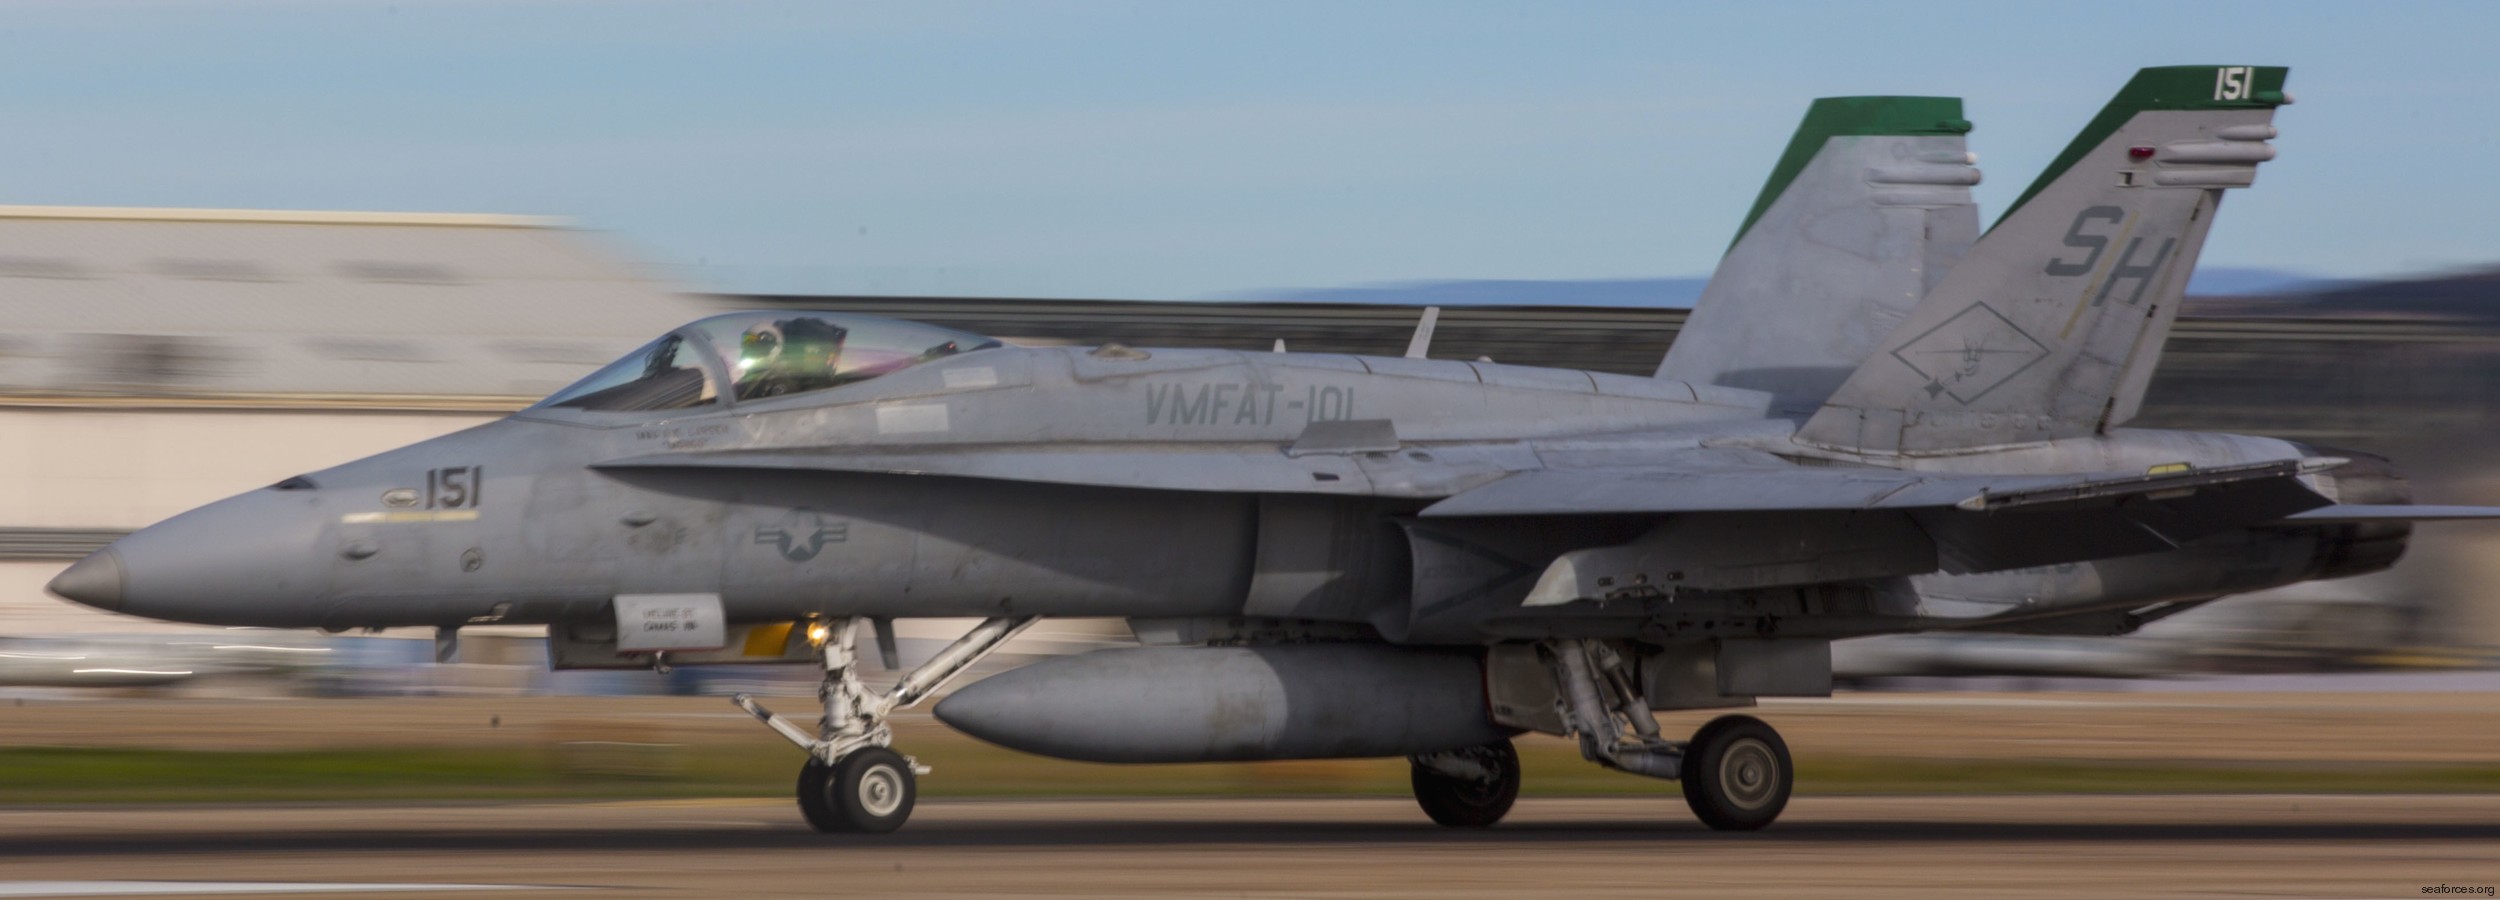 vmfat-101 sharpshooters marine fighter attack training squadron f/a-18c hornet 38